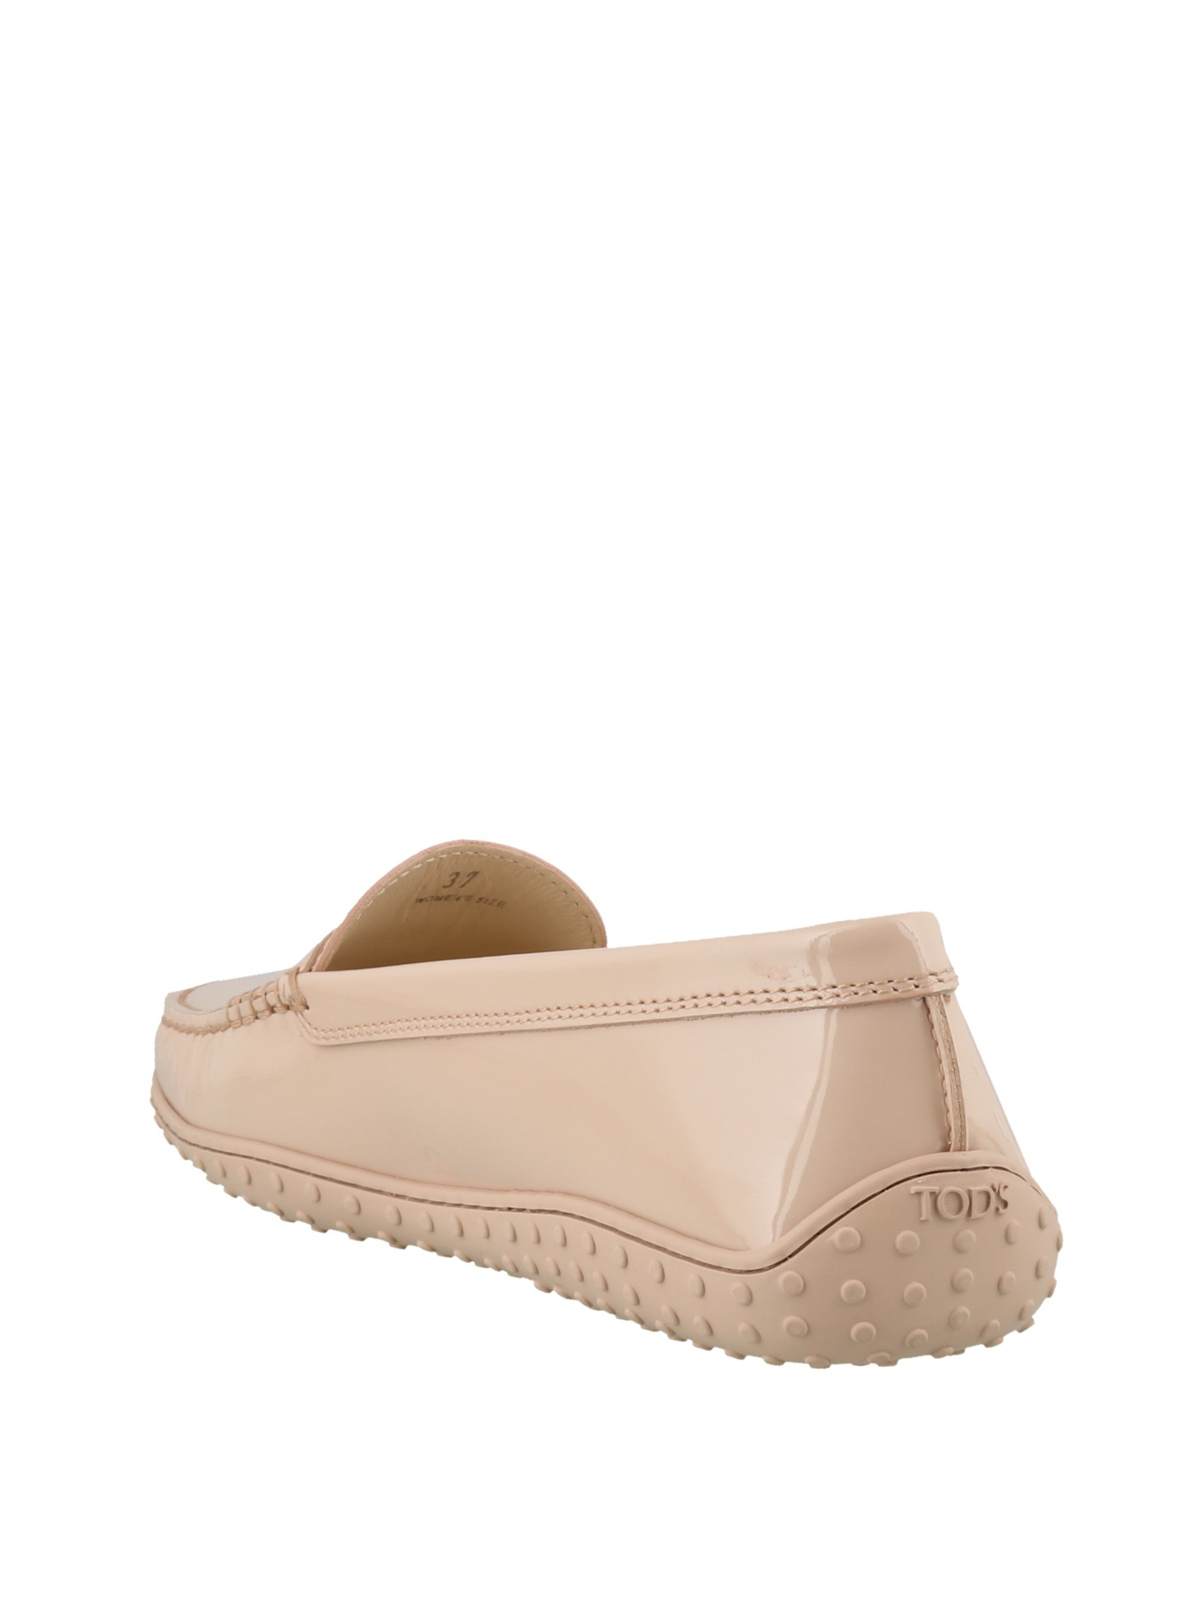 Anvendelse Snuble Bagvaskelse Loafers & Slippers Tod's - Pink patent leather loafers - XXW29C00010OW0M030